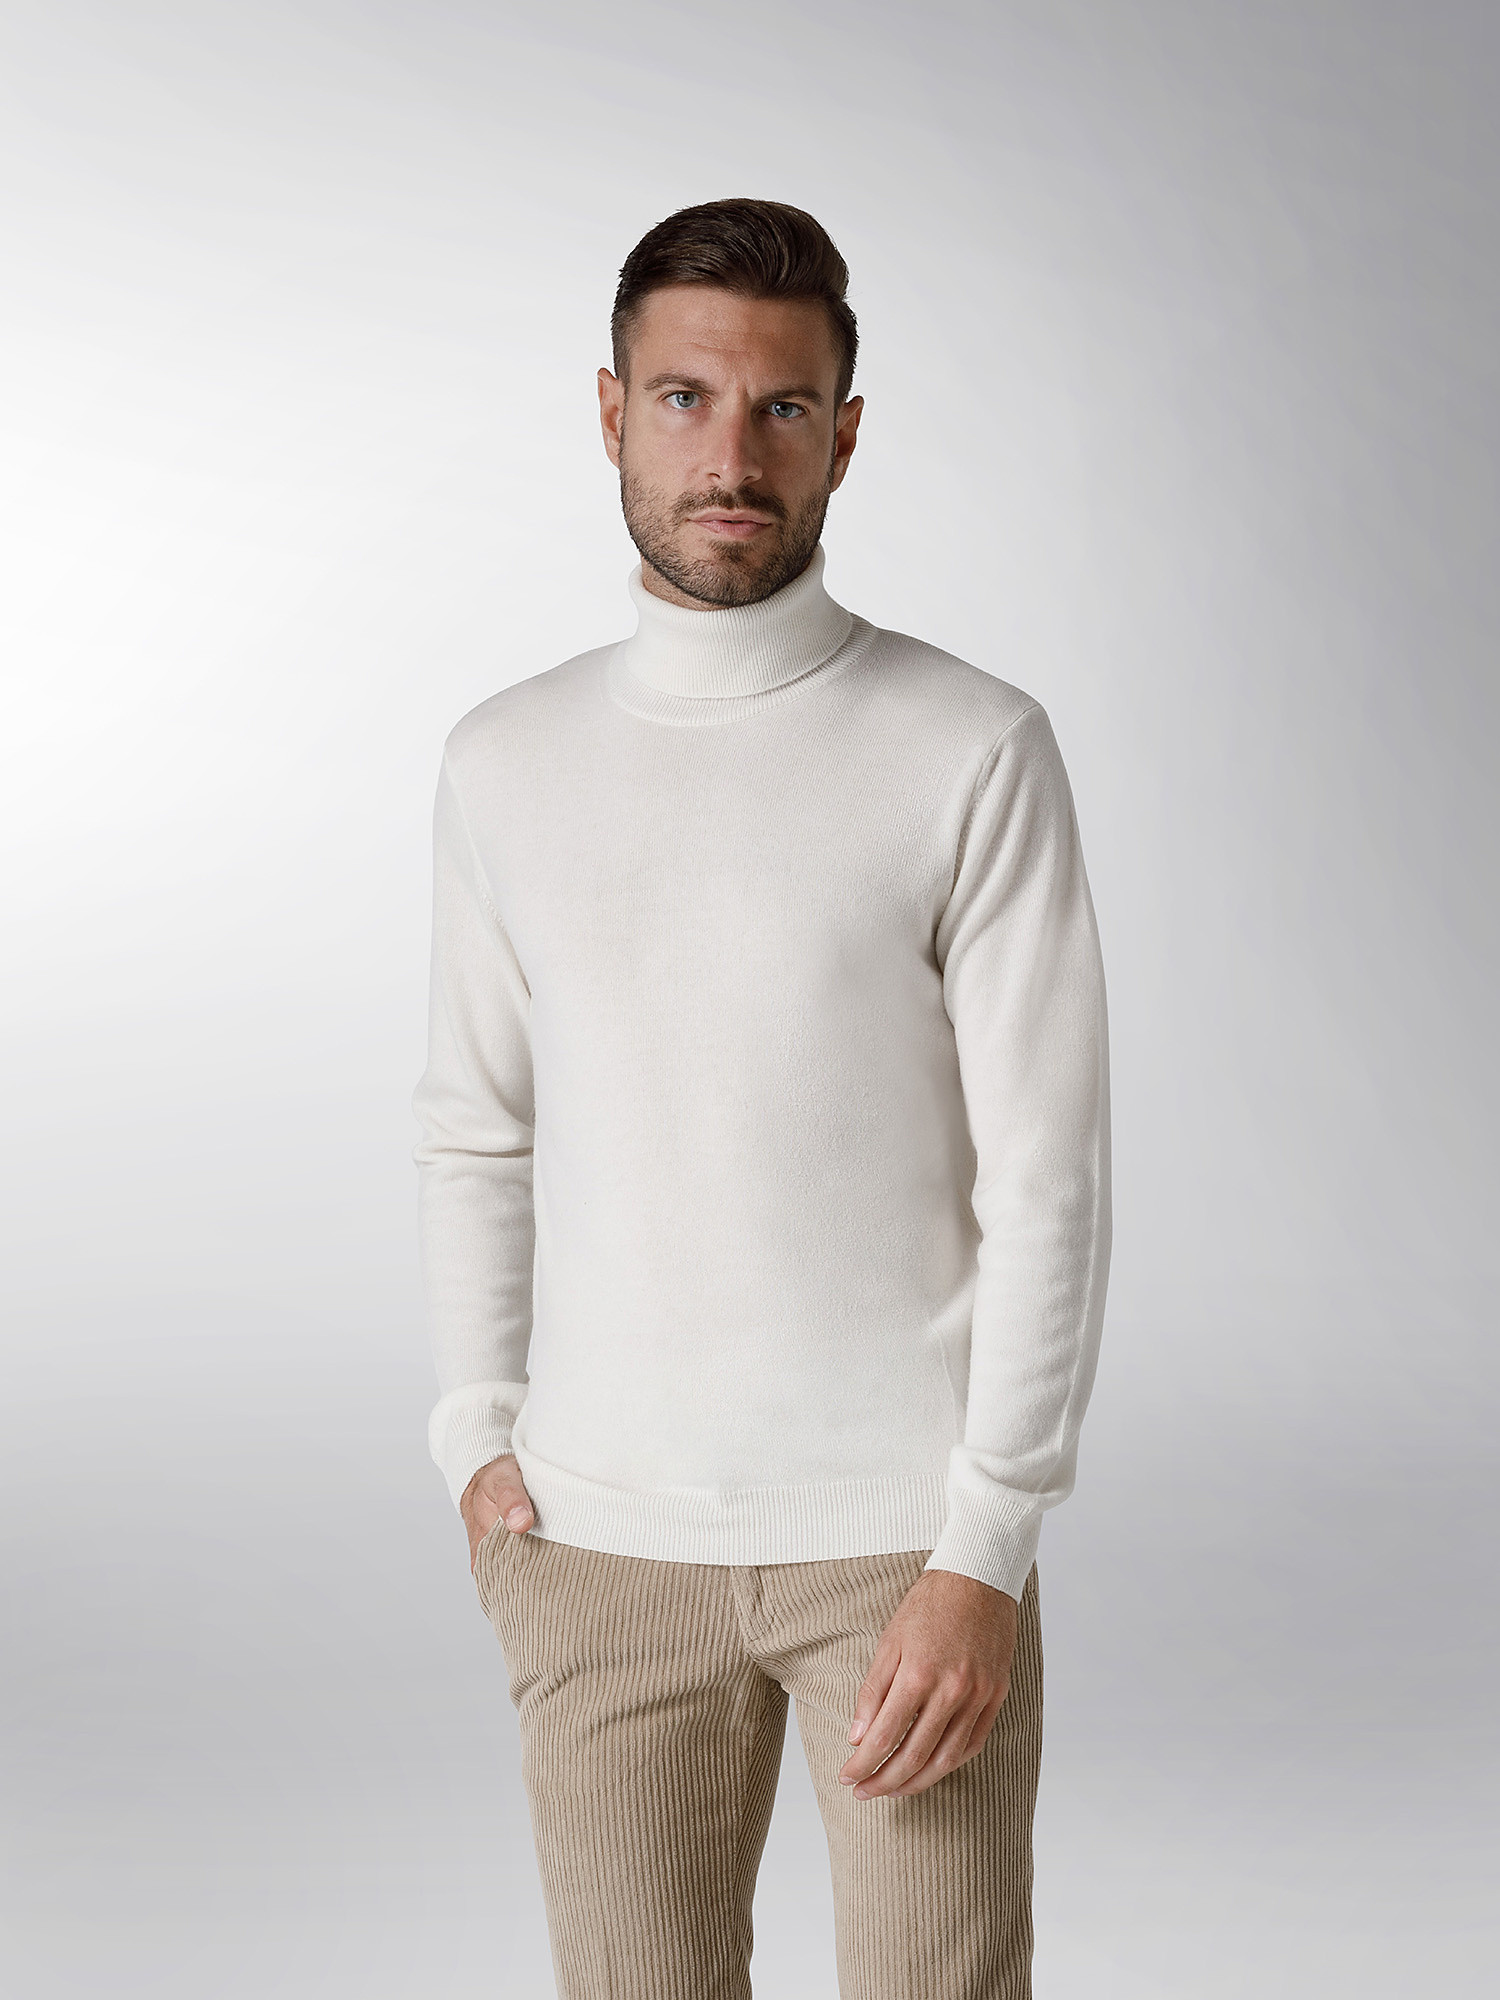 Coin Cashmere - Turtleneck in pure cashmere, White, large image number 1